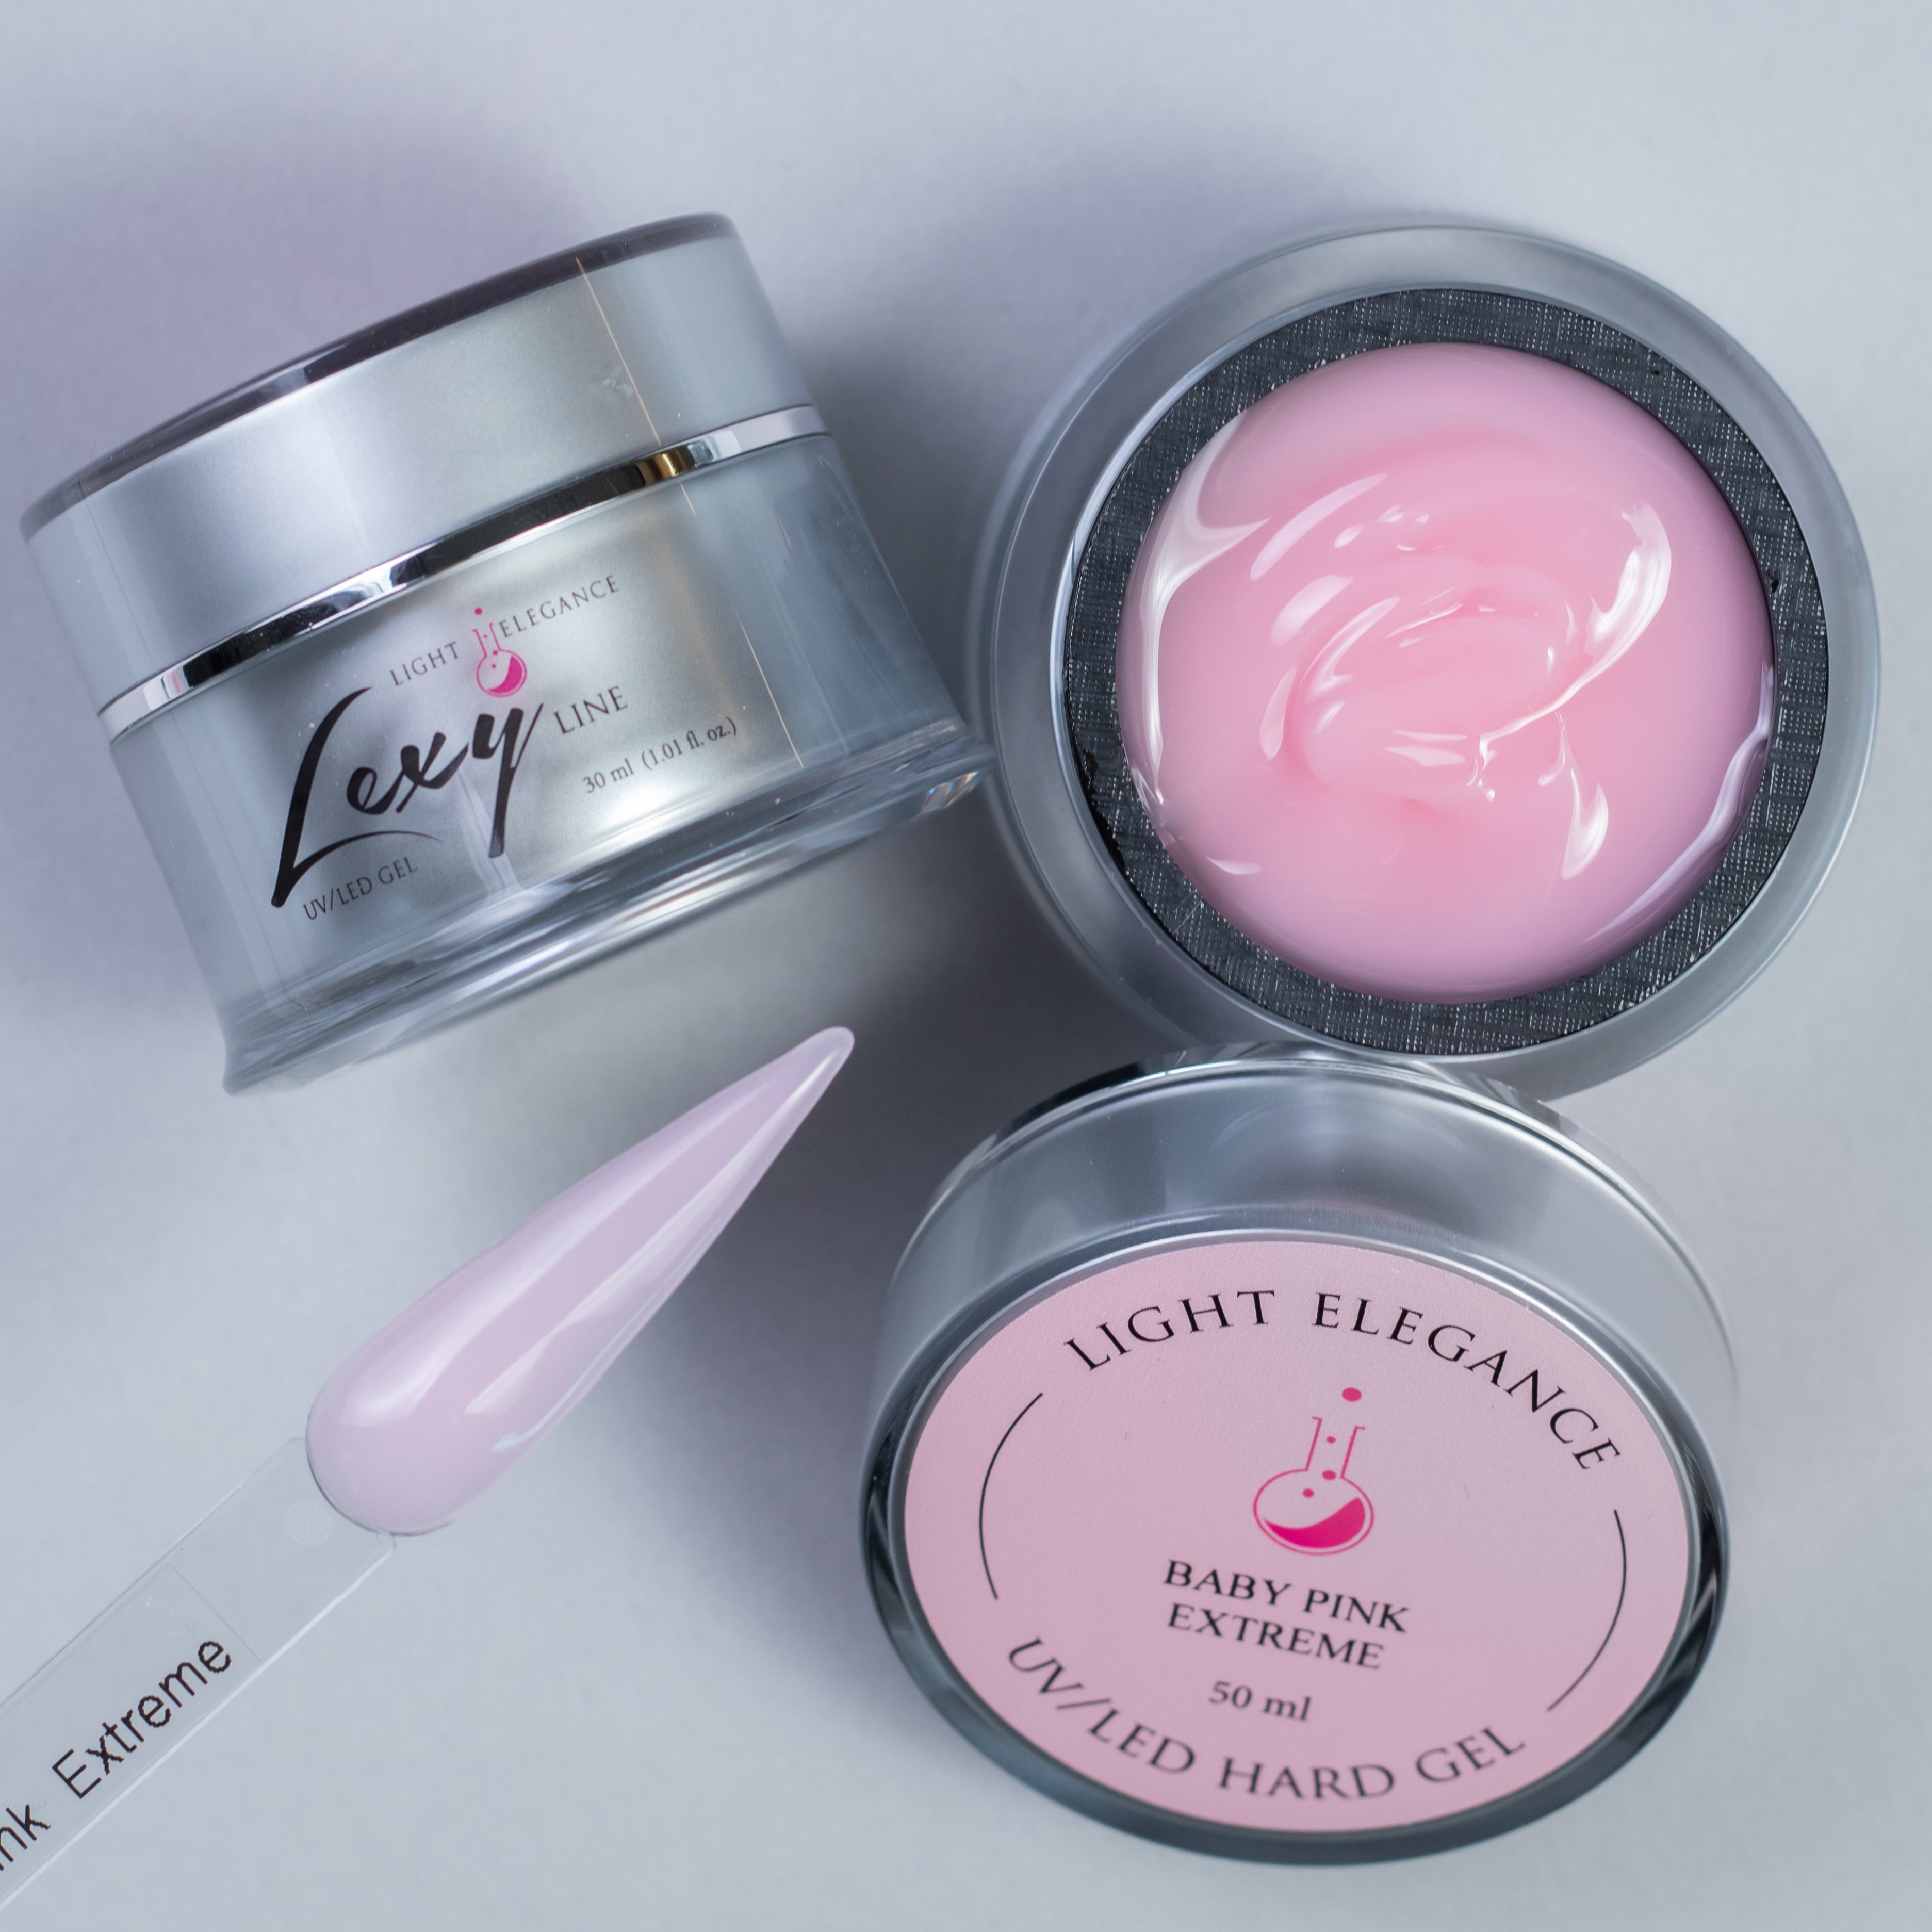 Baby Pink Extreme Lexy Building Gel Light